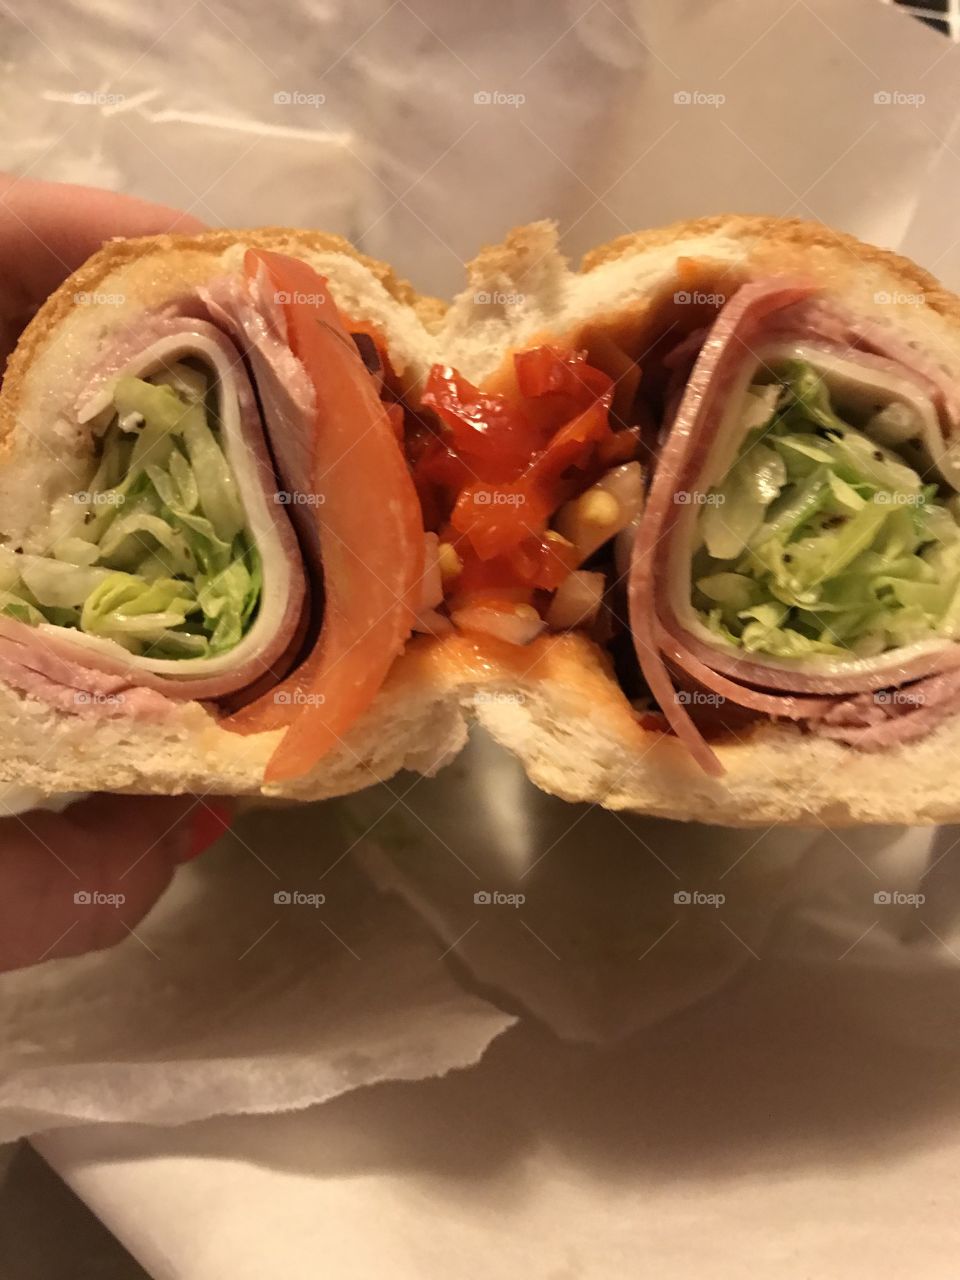 Can’t get enough Italian cold cut sandwiches. Bring on the hits.